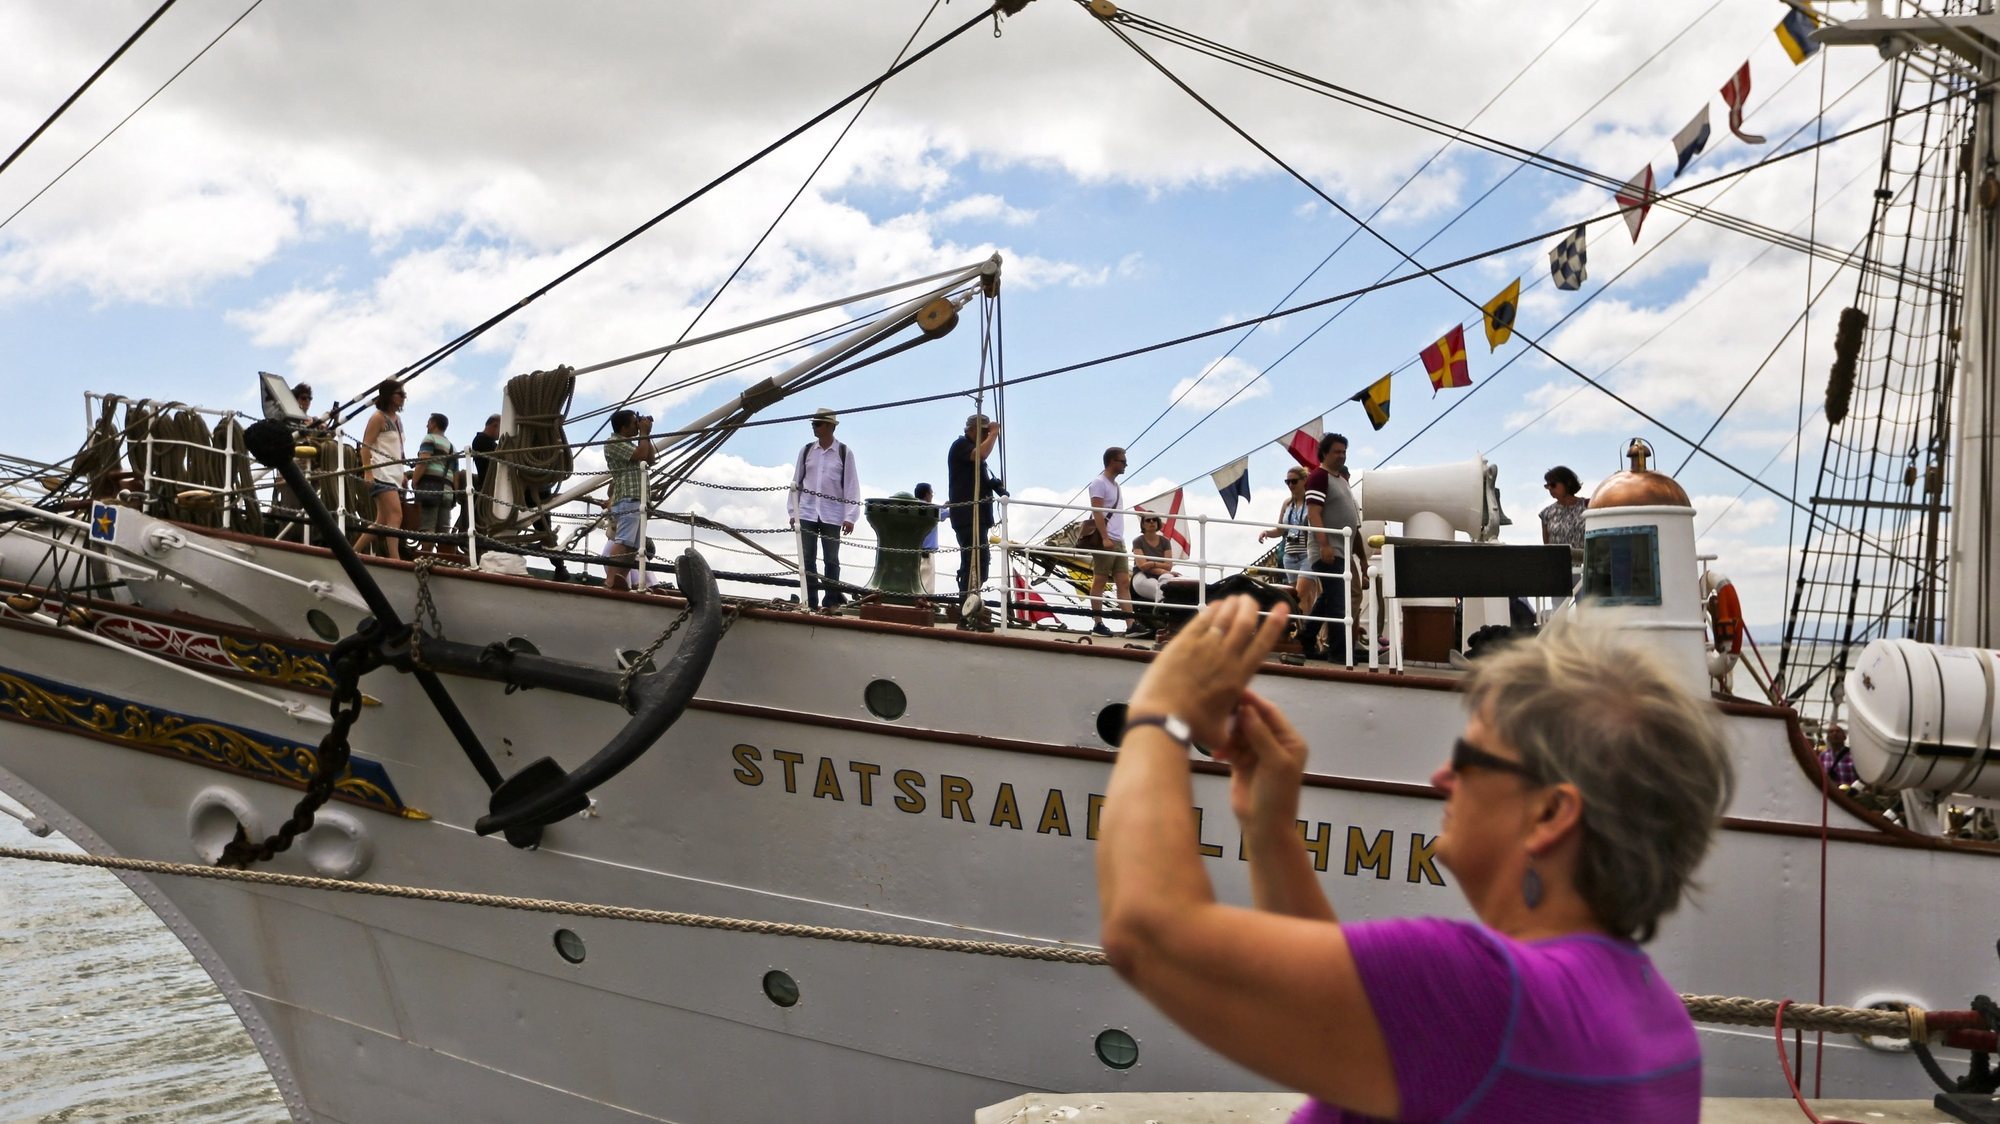 epa05436635 People visit the Norway&#039;s ship Statsraad Lehmkuhl  at Santa Apolonia dock during the Tall Ships Races Lisbon 2016, in Lisbon, Portugal, 22 July 2016. The event celebrates its 60th anniversary this year.  EPA/MARIO CRUZ